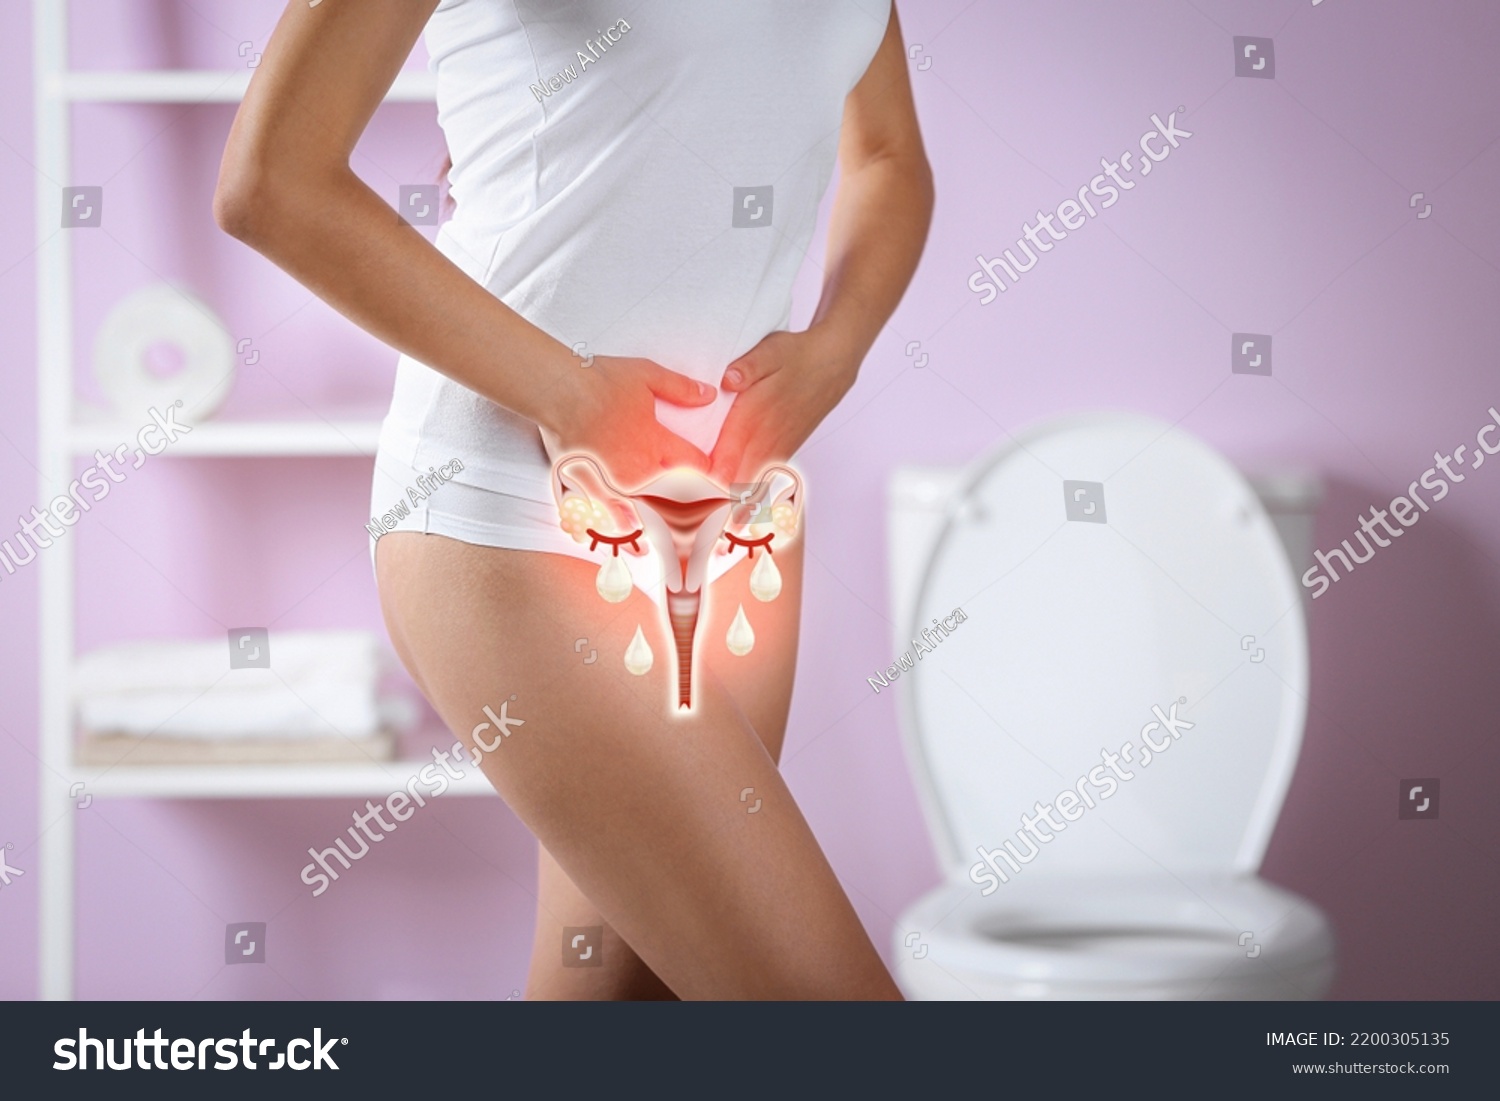 Woman holding hands on her belly and illustration of female reproductive system. Vaginal yeast infection #2200305135